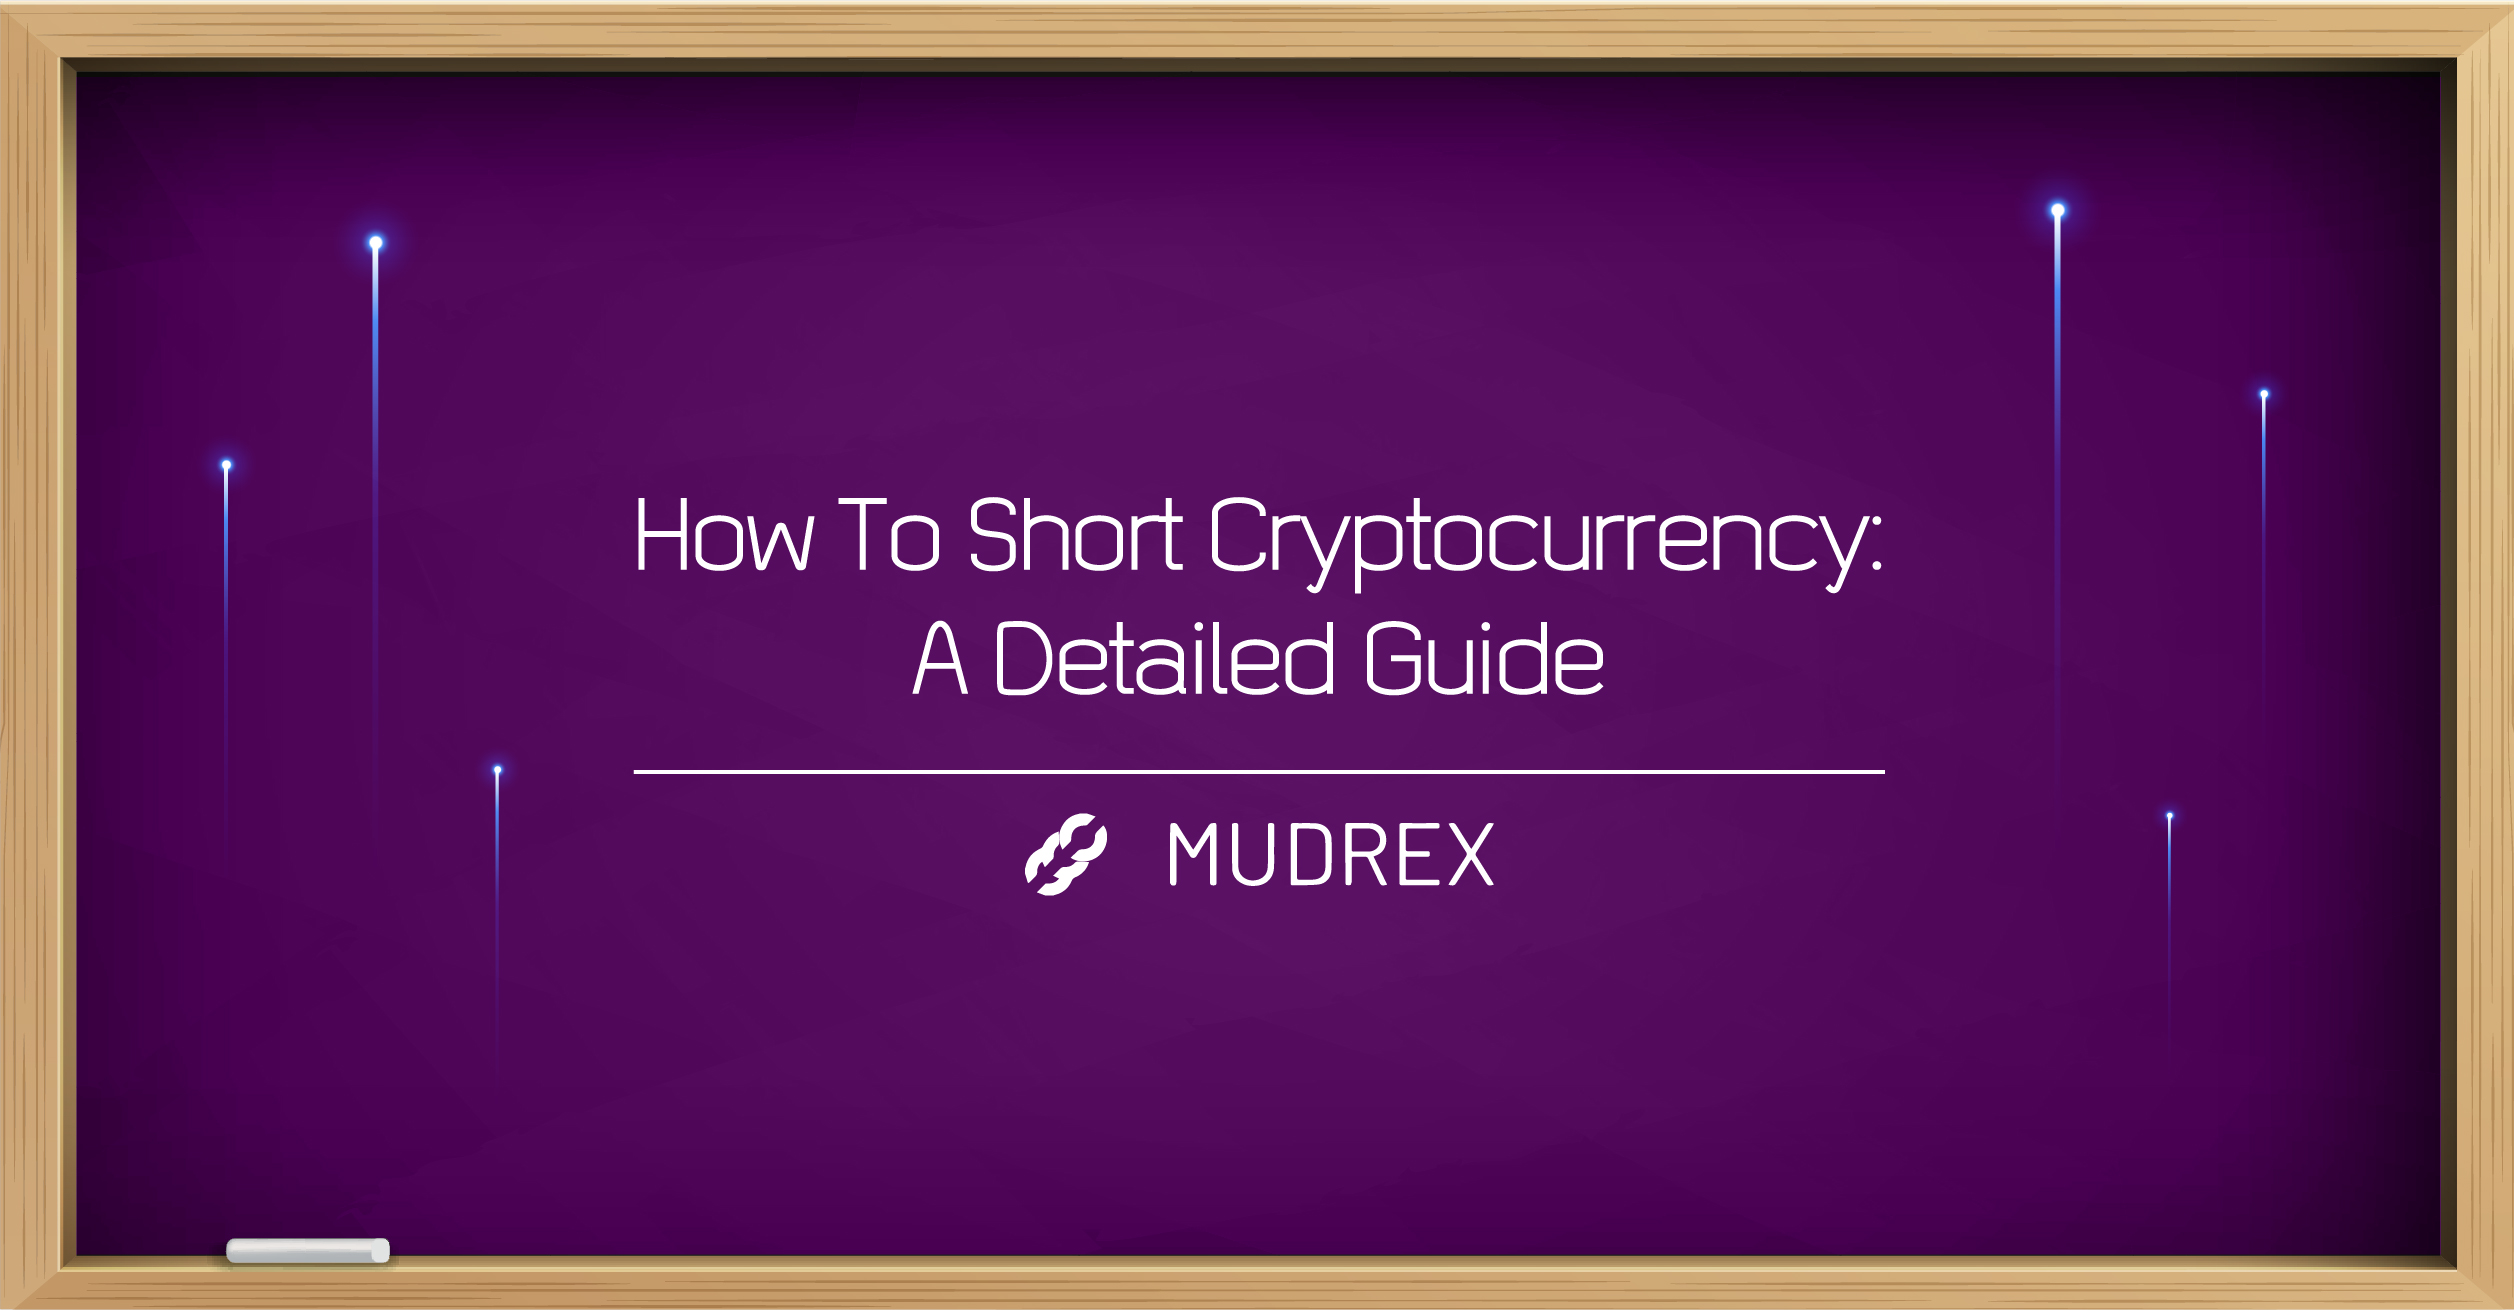 How To Short Cryptocurrency Guide